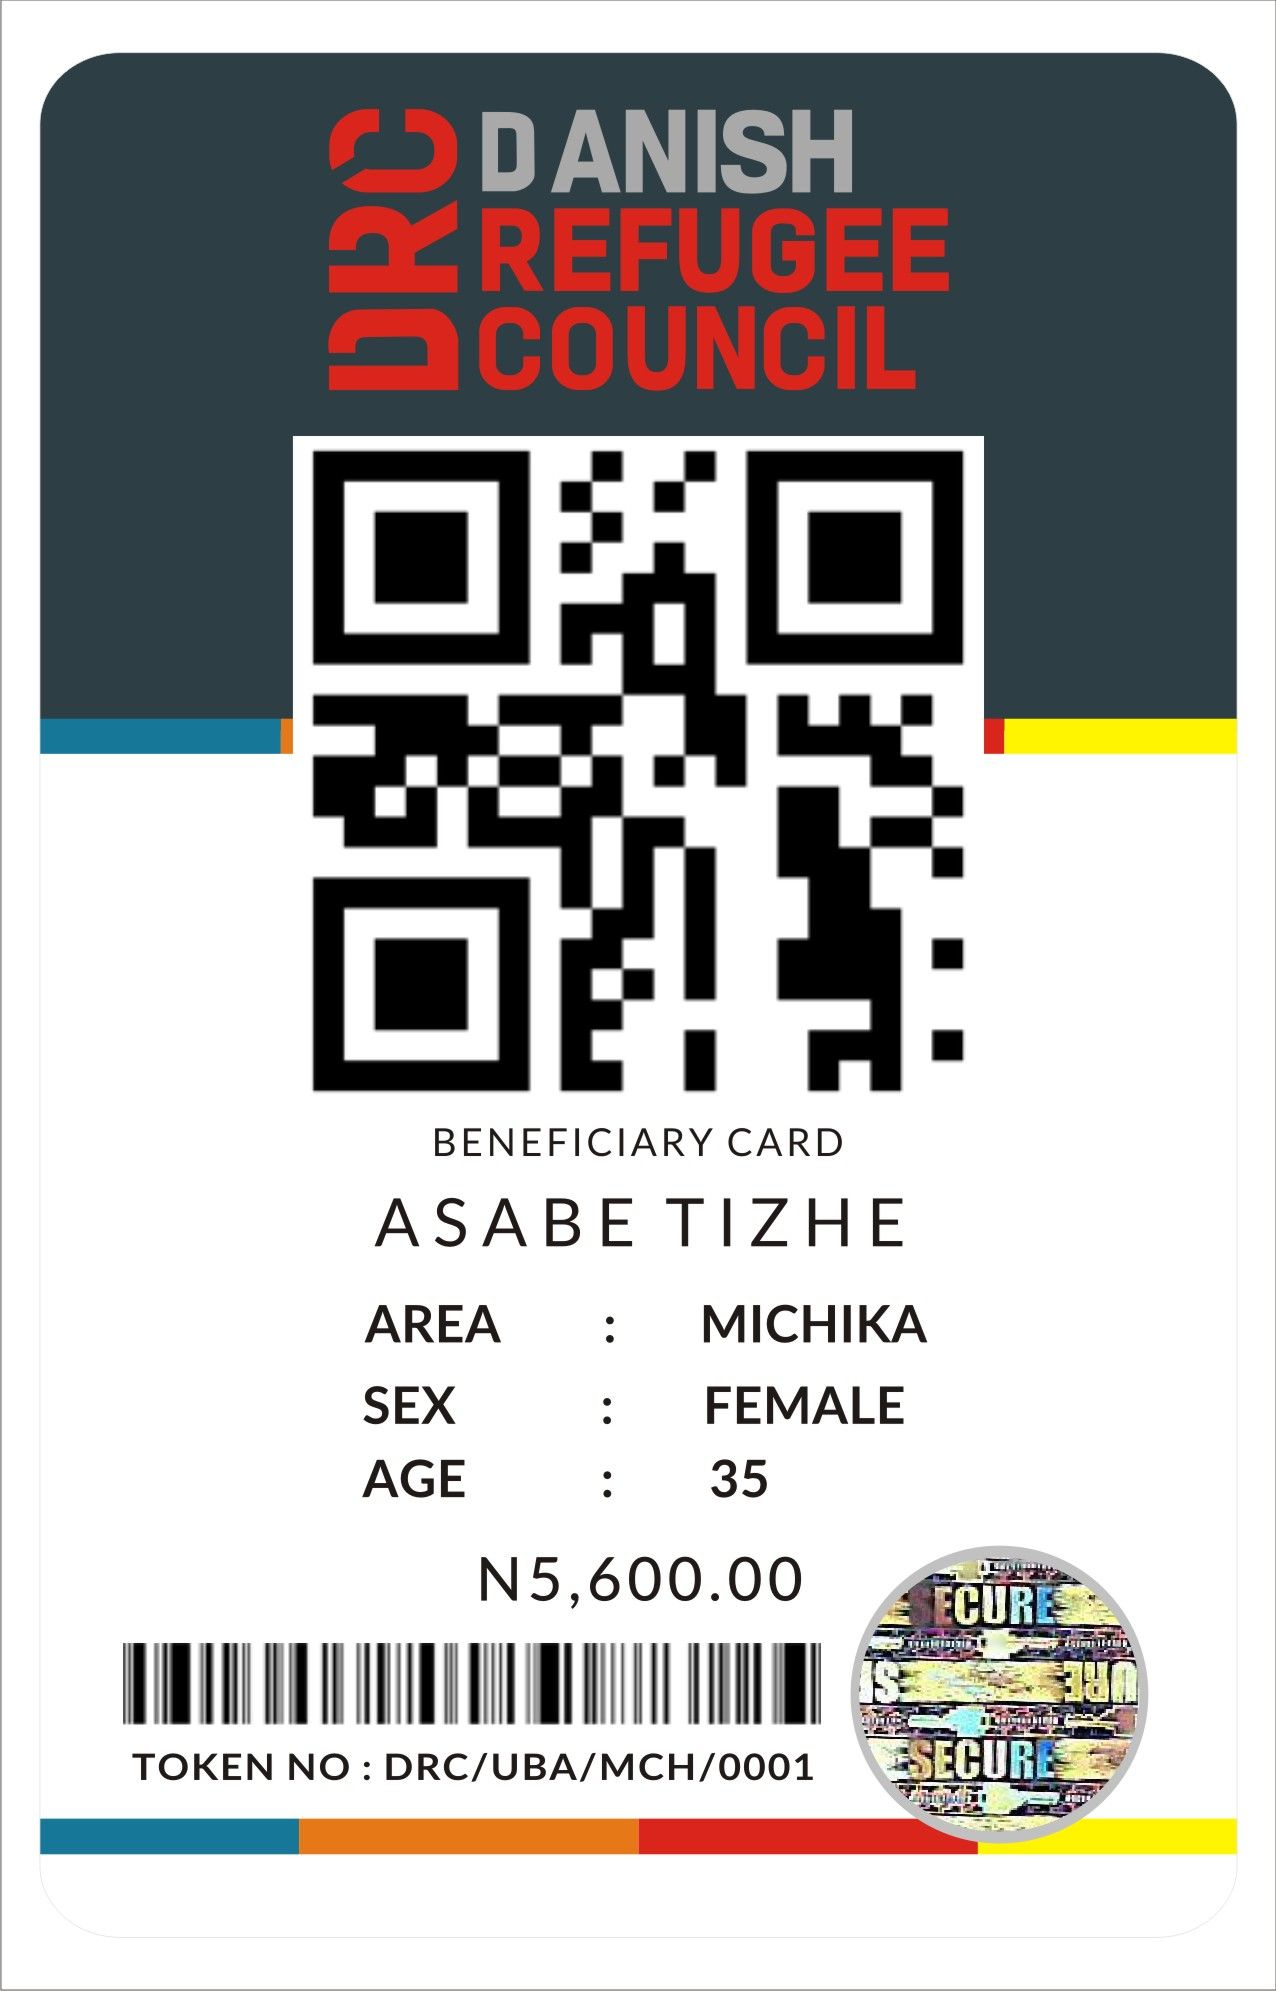 CALL CHINEDU ON 08179651585 TO PRINT SCRATCH CARDS FOR ALL PURPOSES WITH SECURITY FEATURES